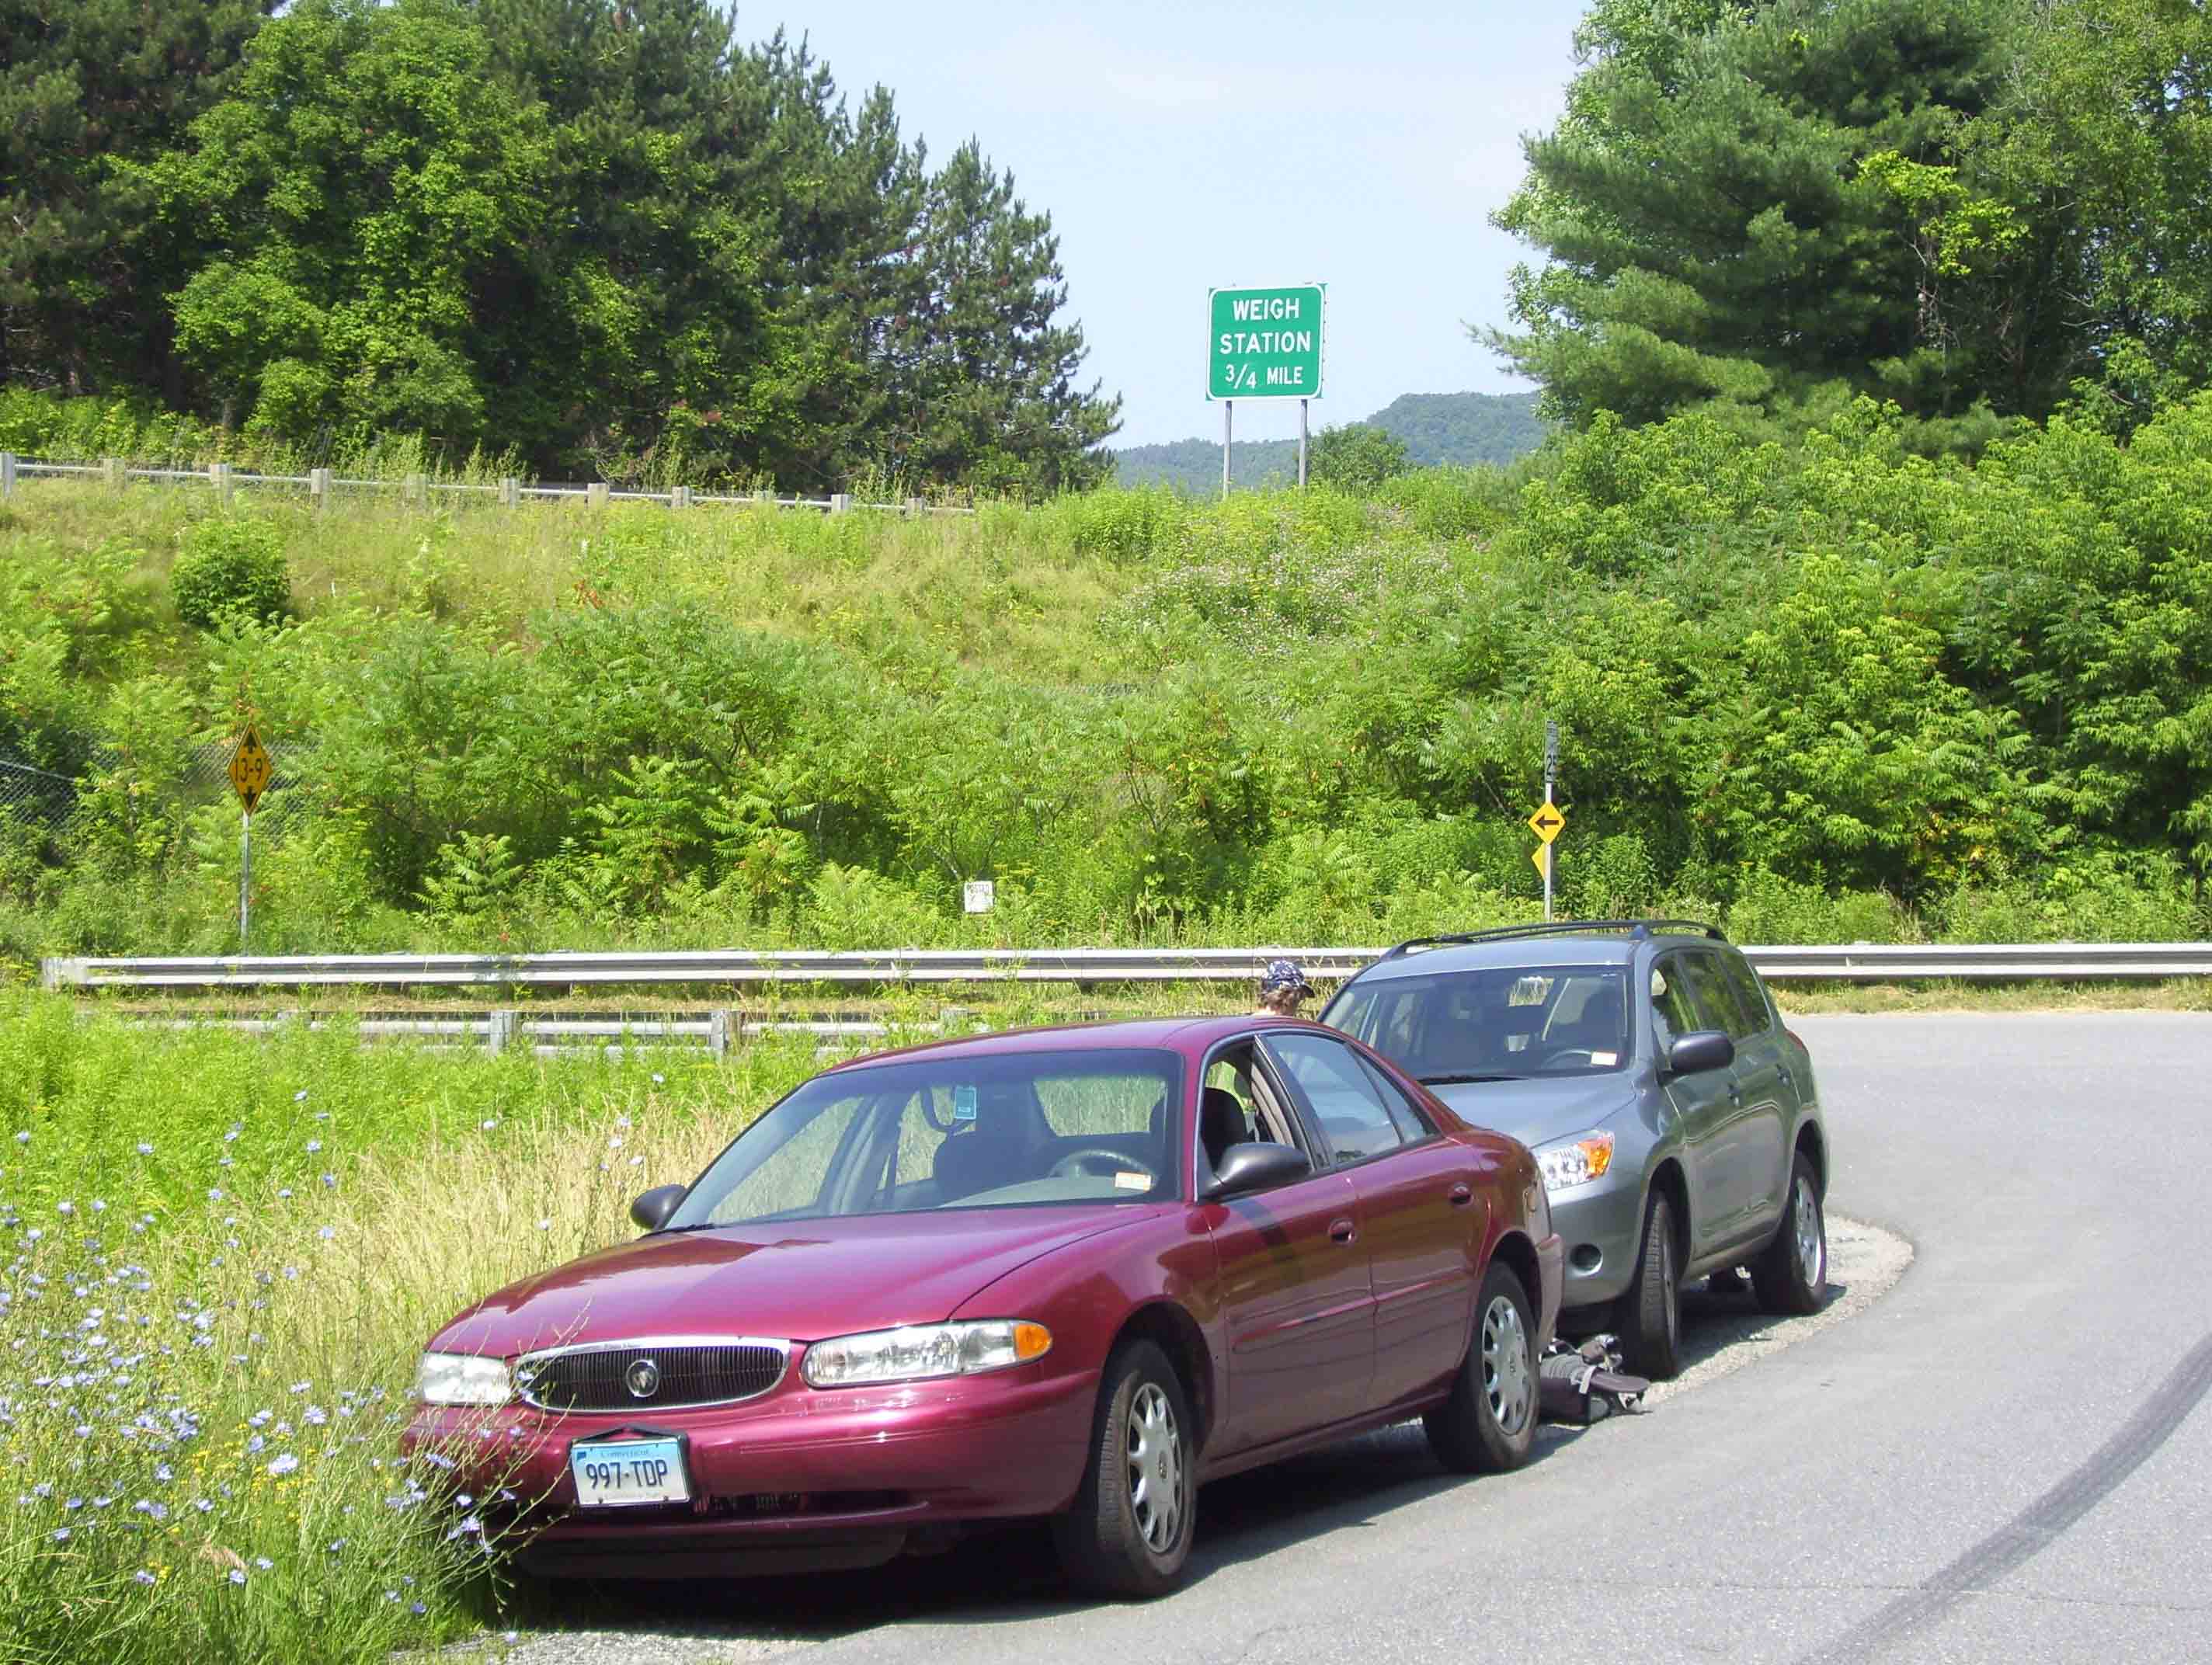 mm 8.7 Parking at the intersection of Podunk Road and Tigertown Road near West Hartford, VT. I-89 is in the background.  Courtesy dlcul@conncoll.edu